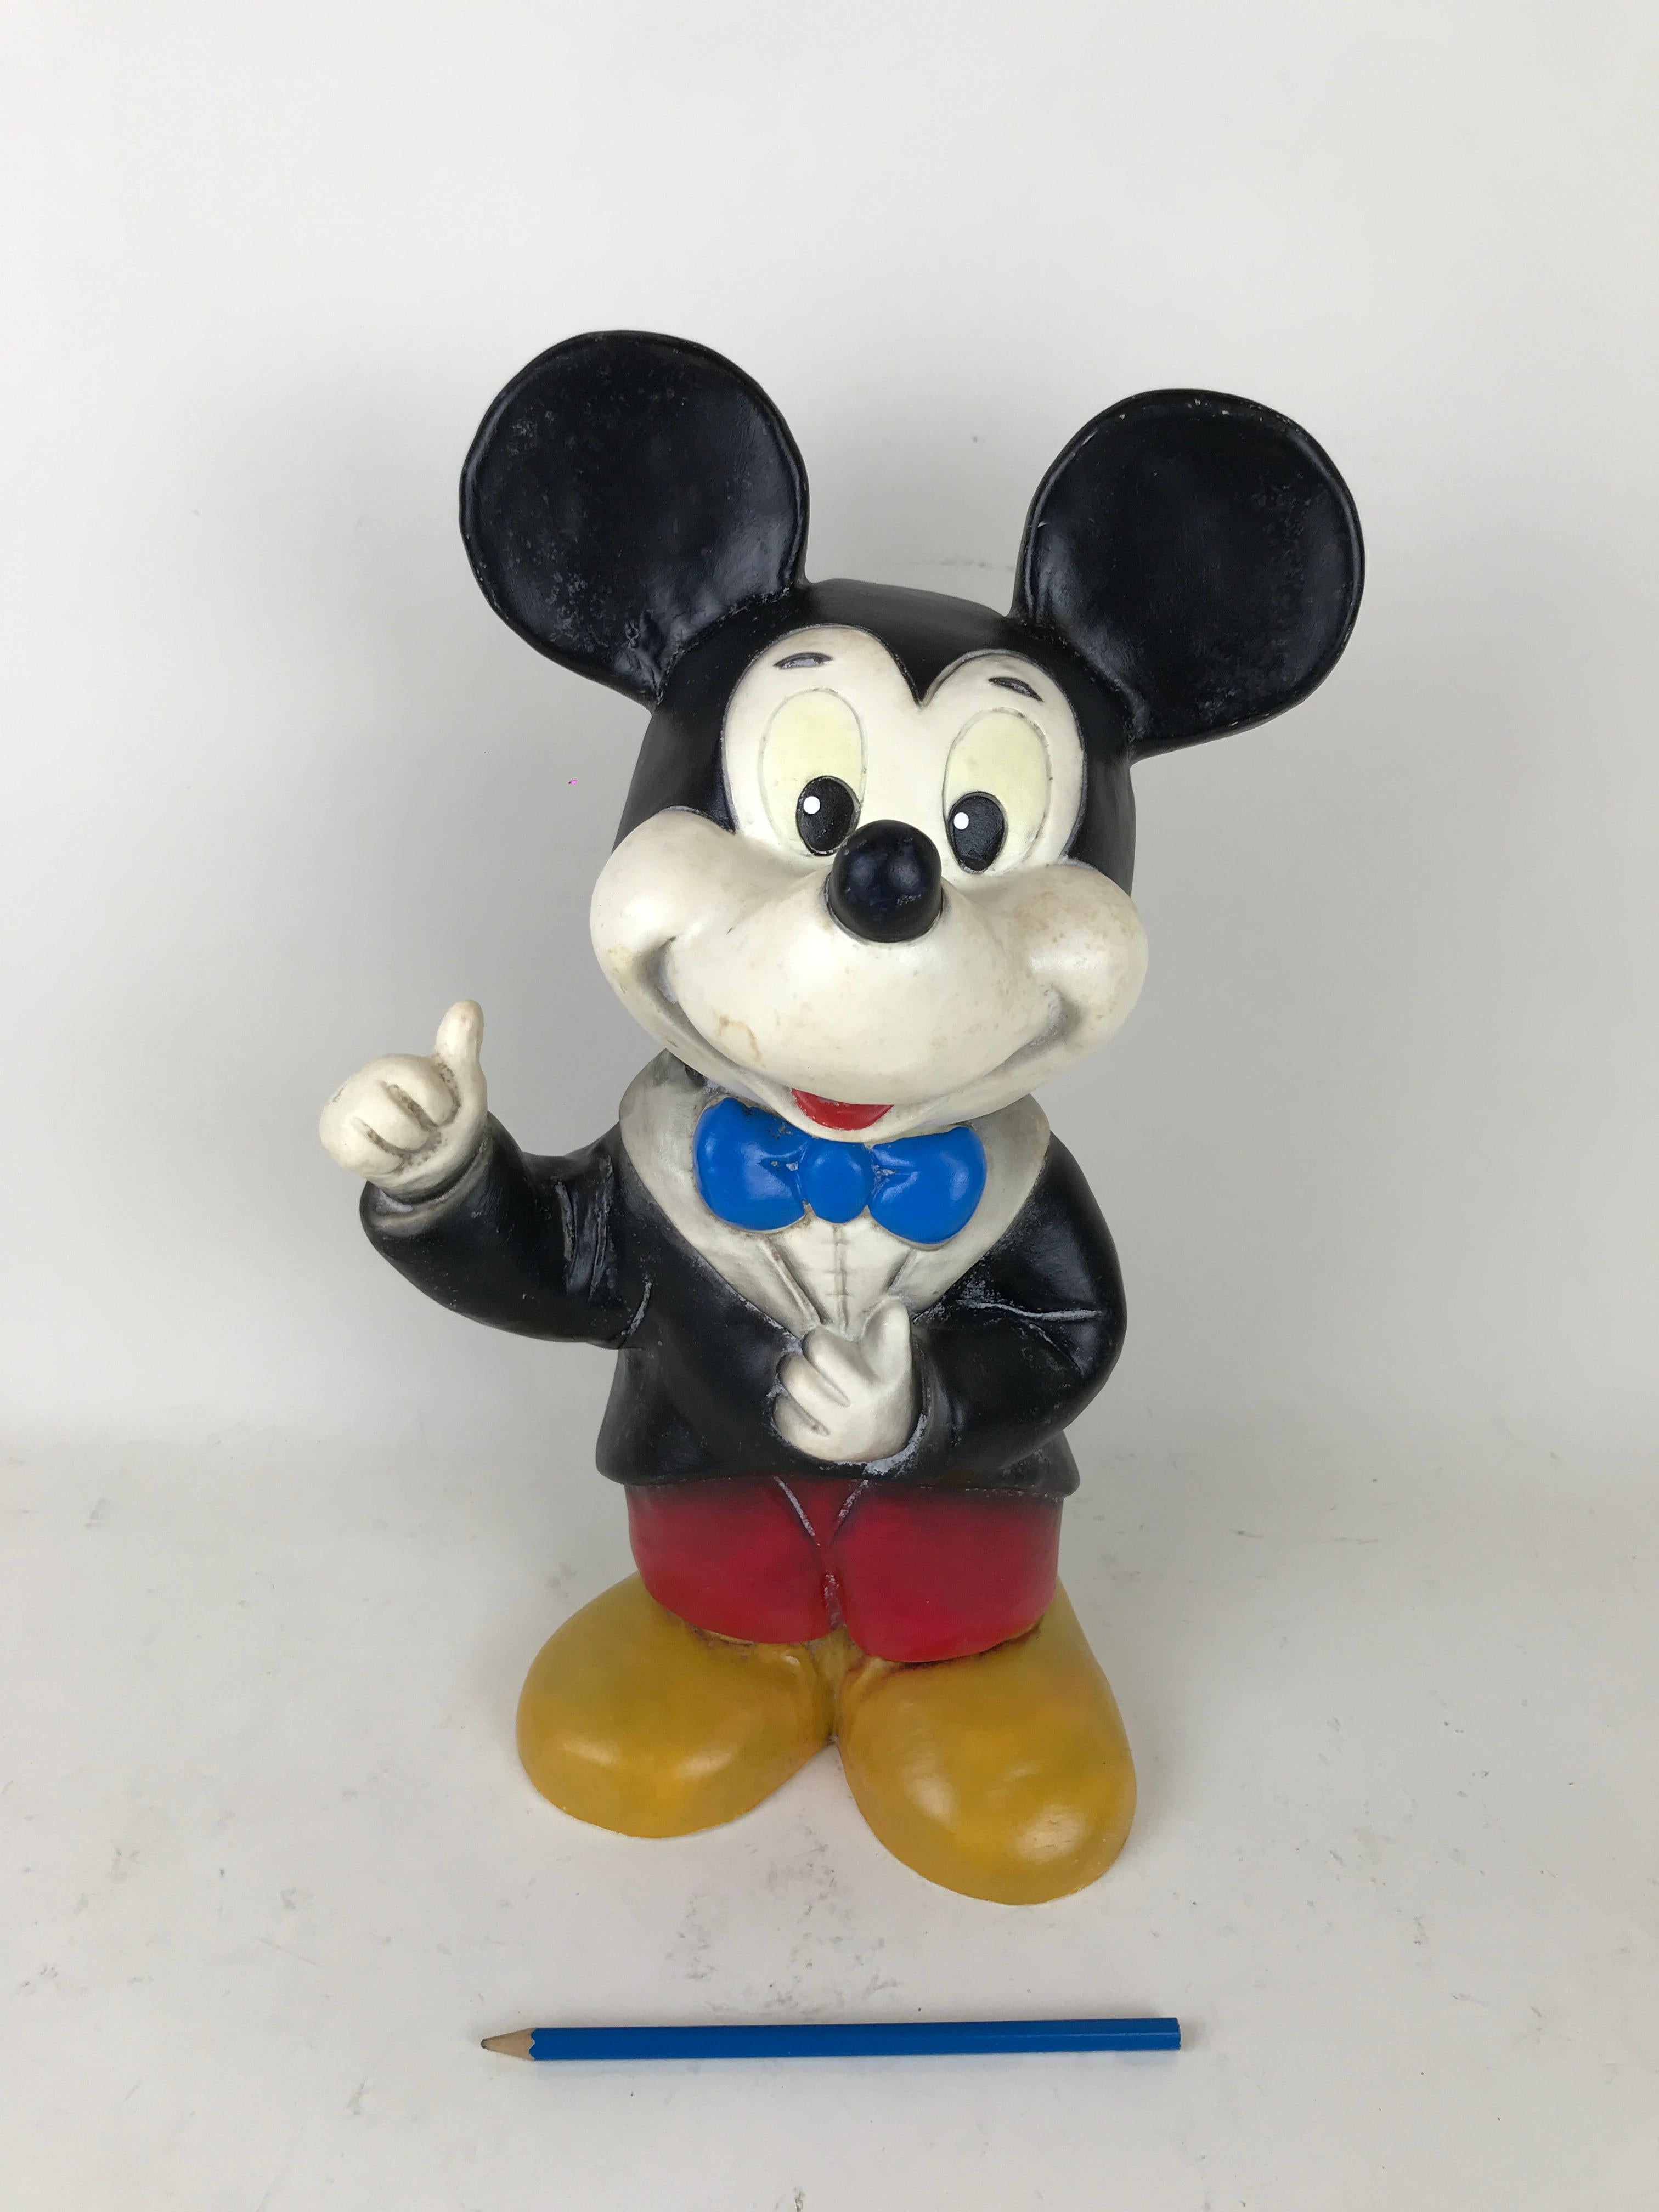 Nice vintage Mickey Mouse nightlight from the German brand Heico, made in the 1980s under licence for Disney. 
Originally produced as nightlight is made of plastic, but doesn't have at present any electrical component and could be a very sculptural